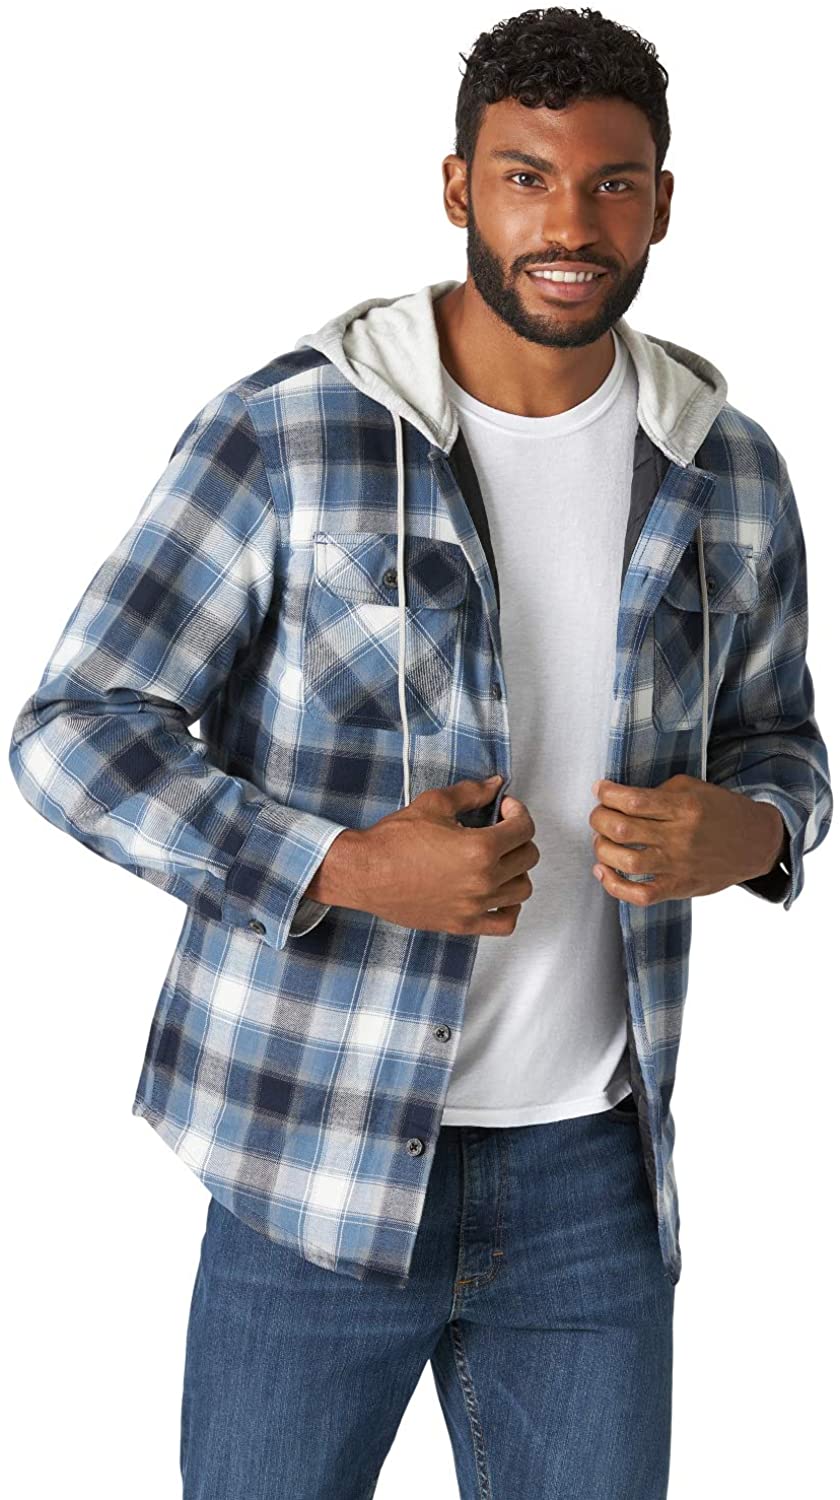 Wrangler Authentics Men's Long Sleeve Quilted Lined Flannel Shirt Jacket  with Ho | eBay